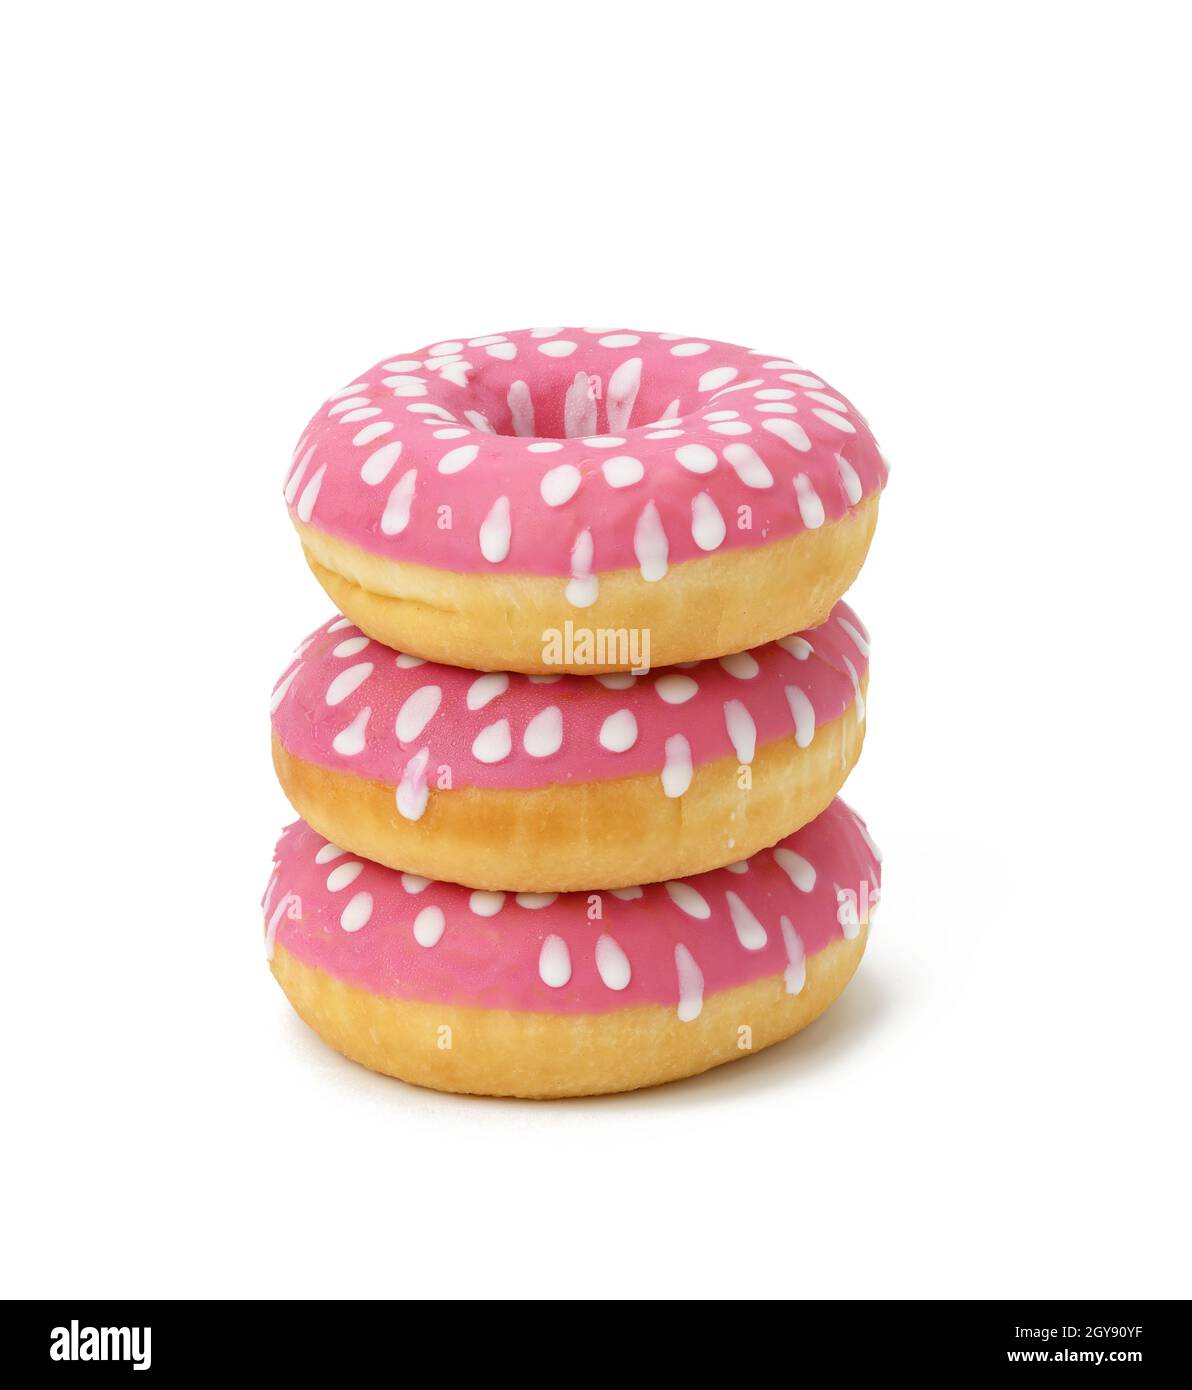 baked round donut with pink icing and white dots isolated on white background, stack Stock Photo